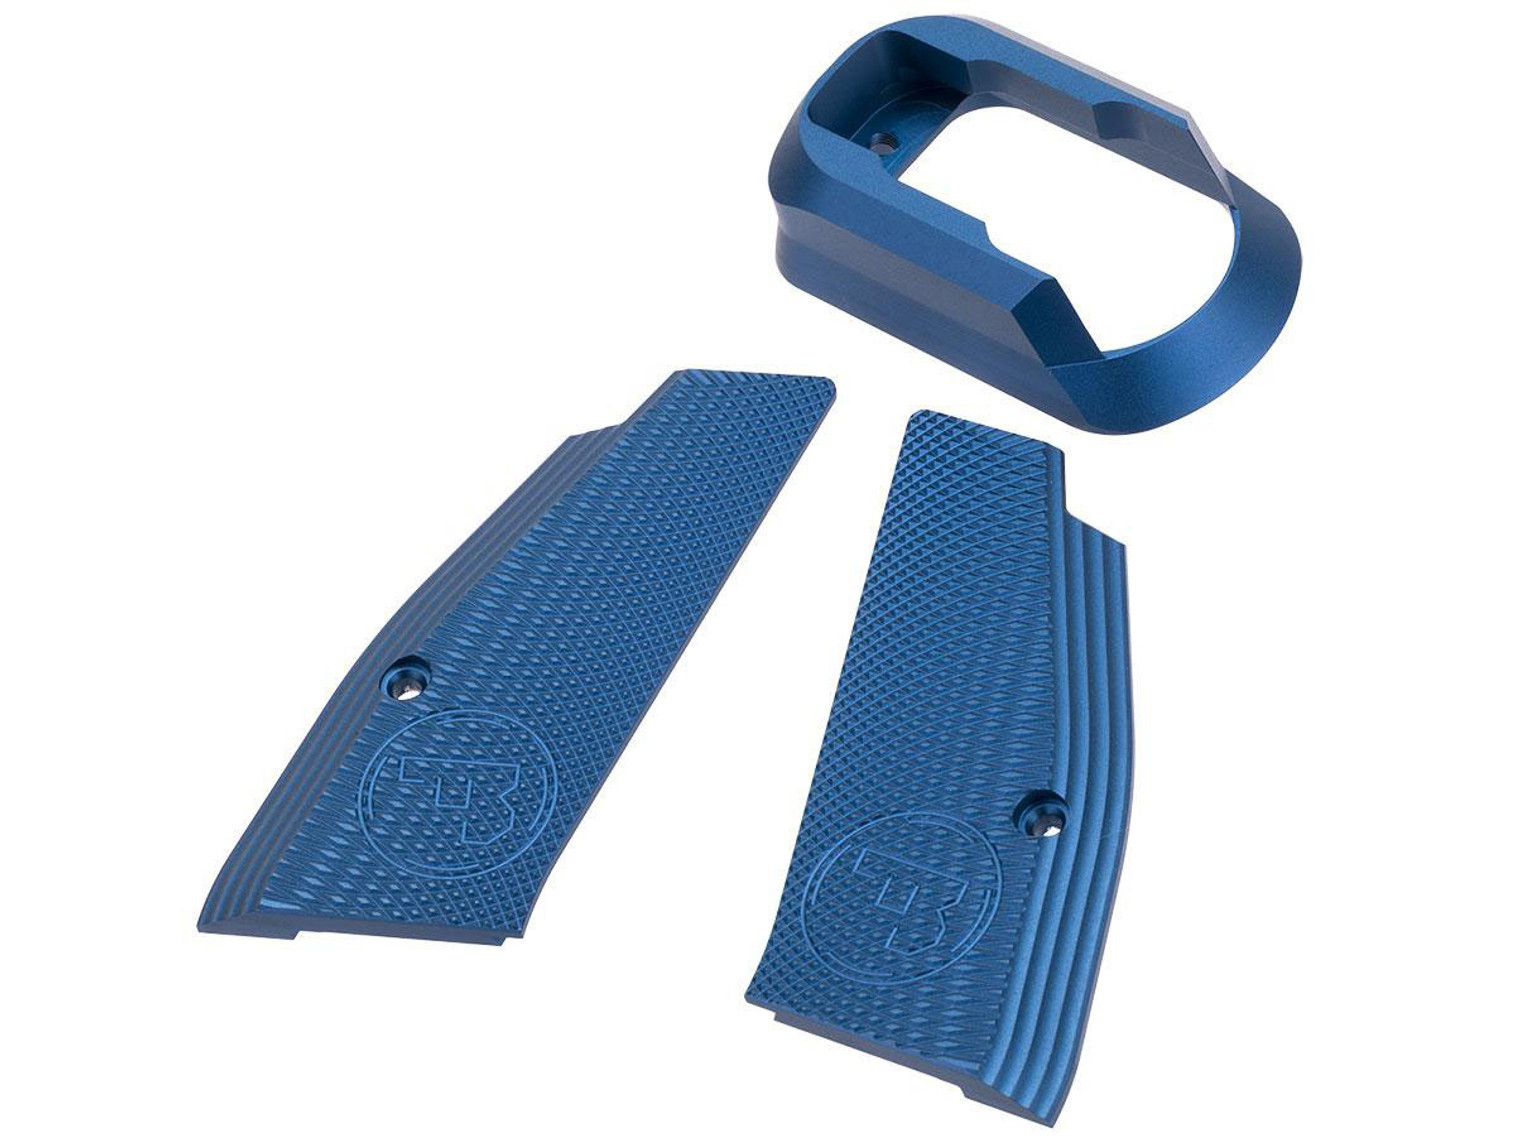 ASG Short Grip and Magwell Set for ASG CZ SP-01 Shadow Airsoft Pistols (Color: Blue)